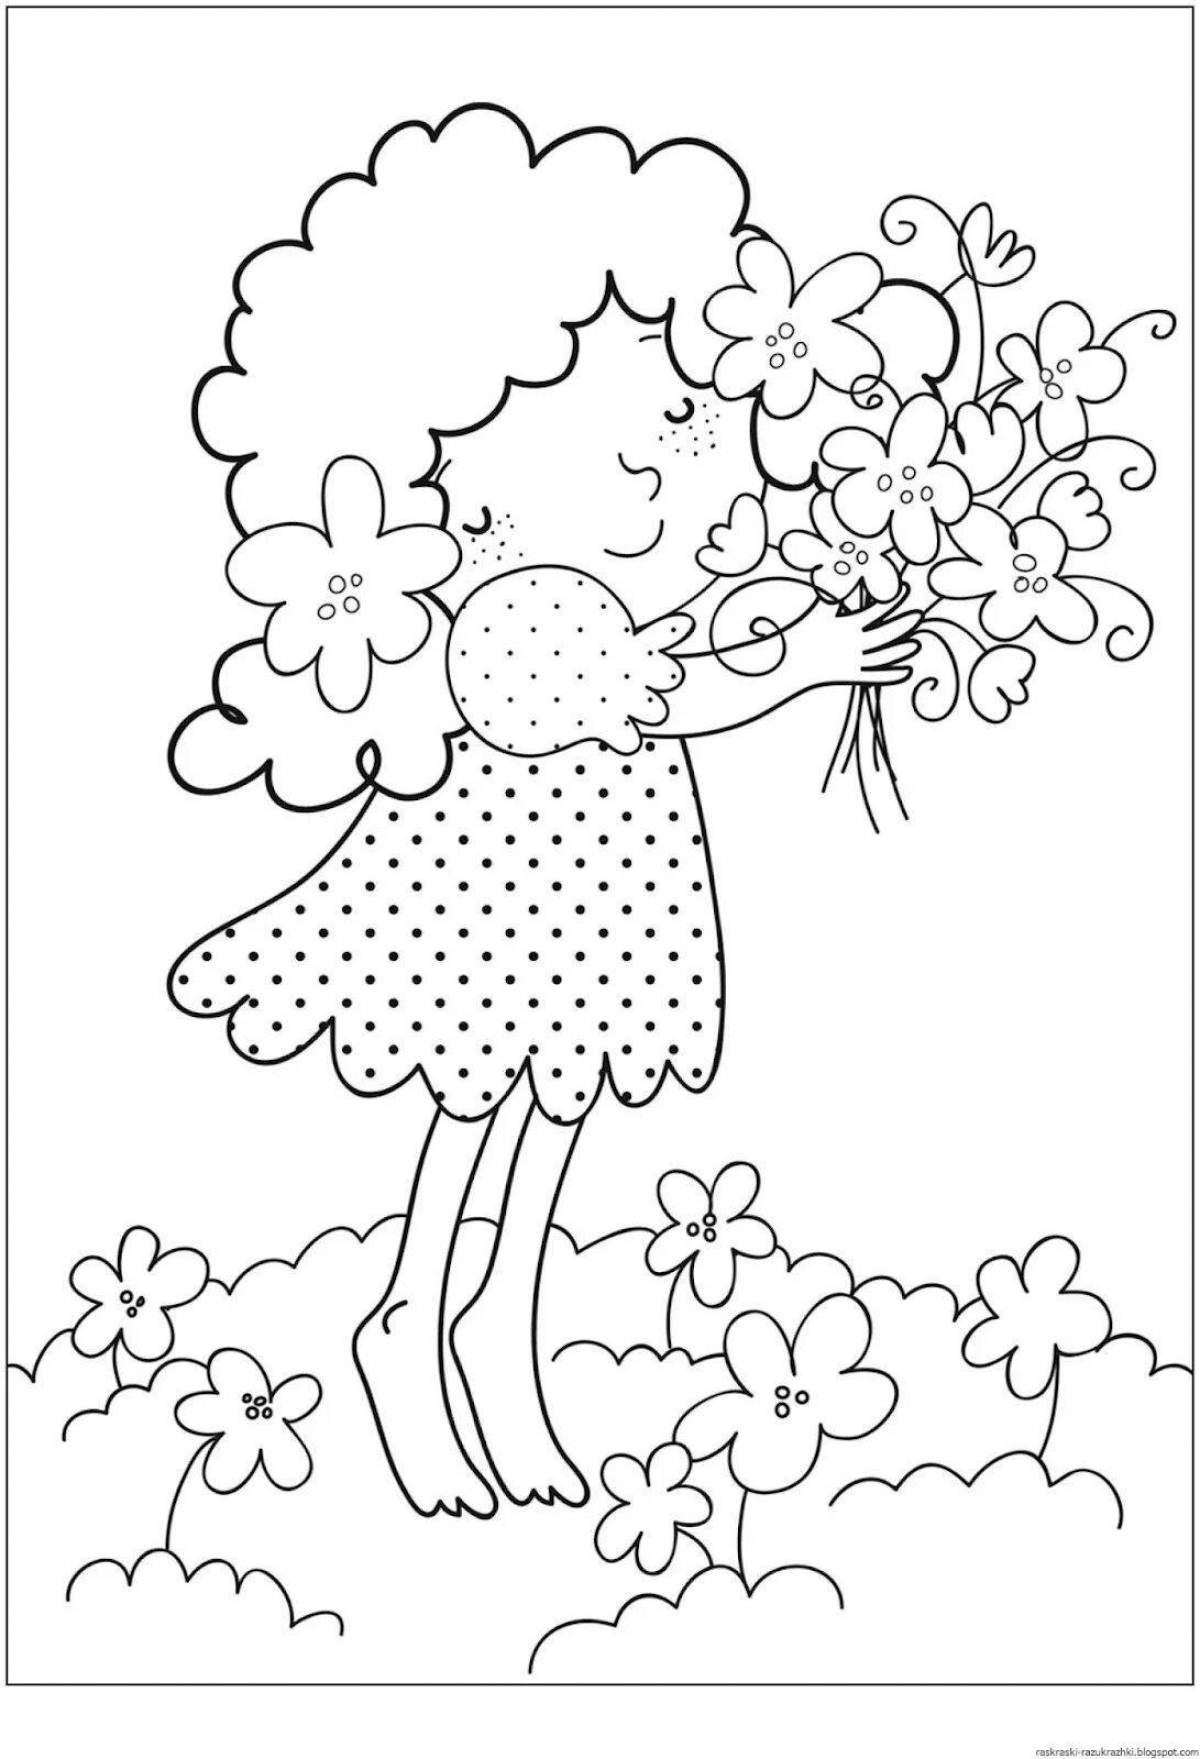 Playful spring coloring for kids